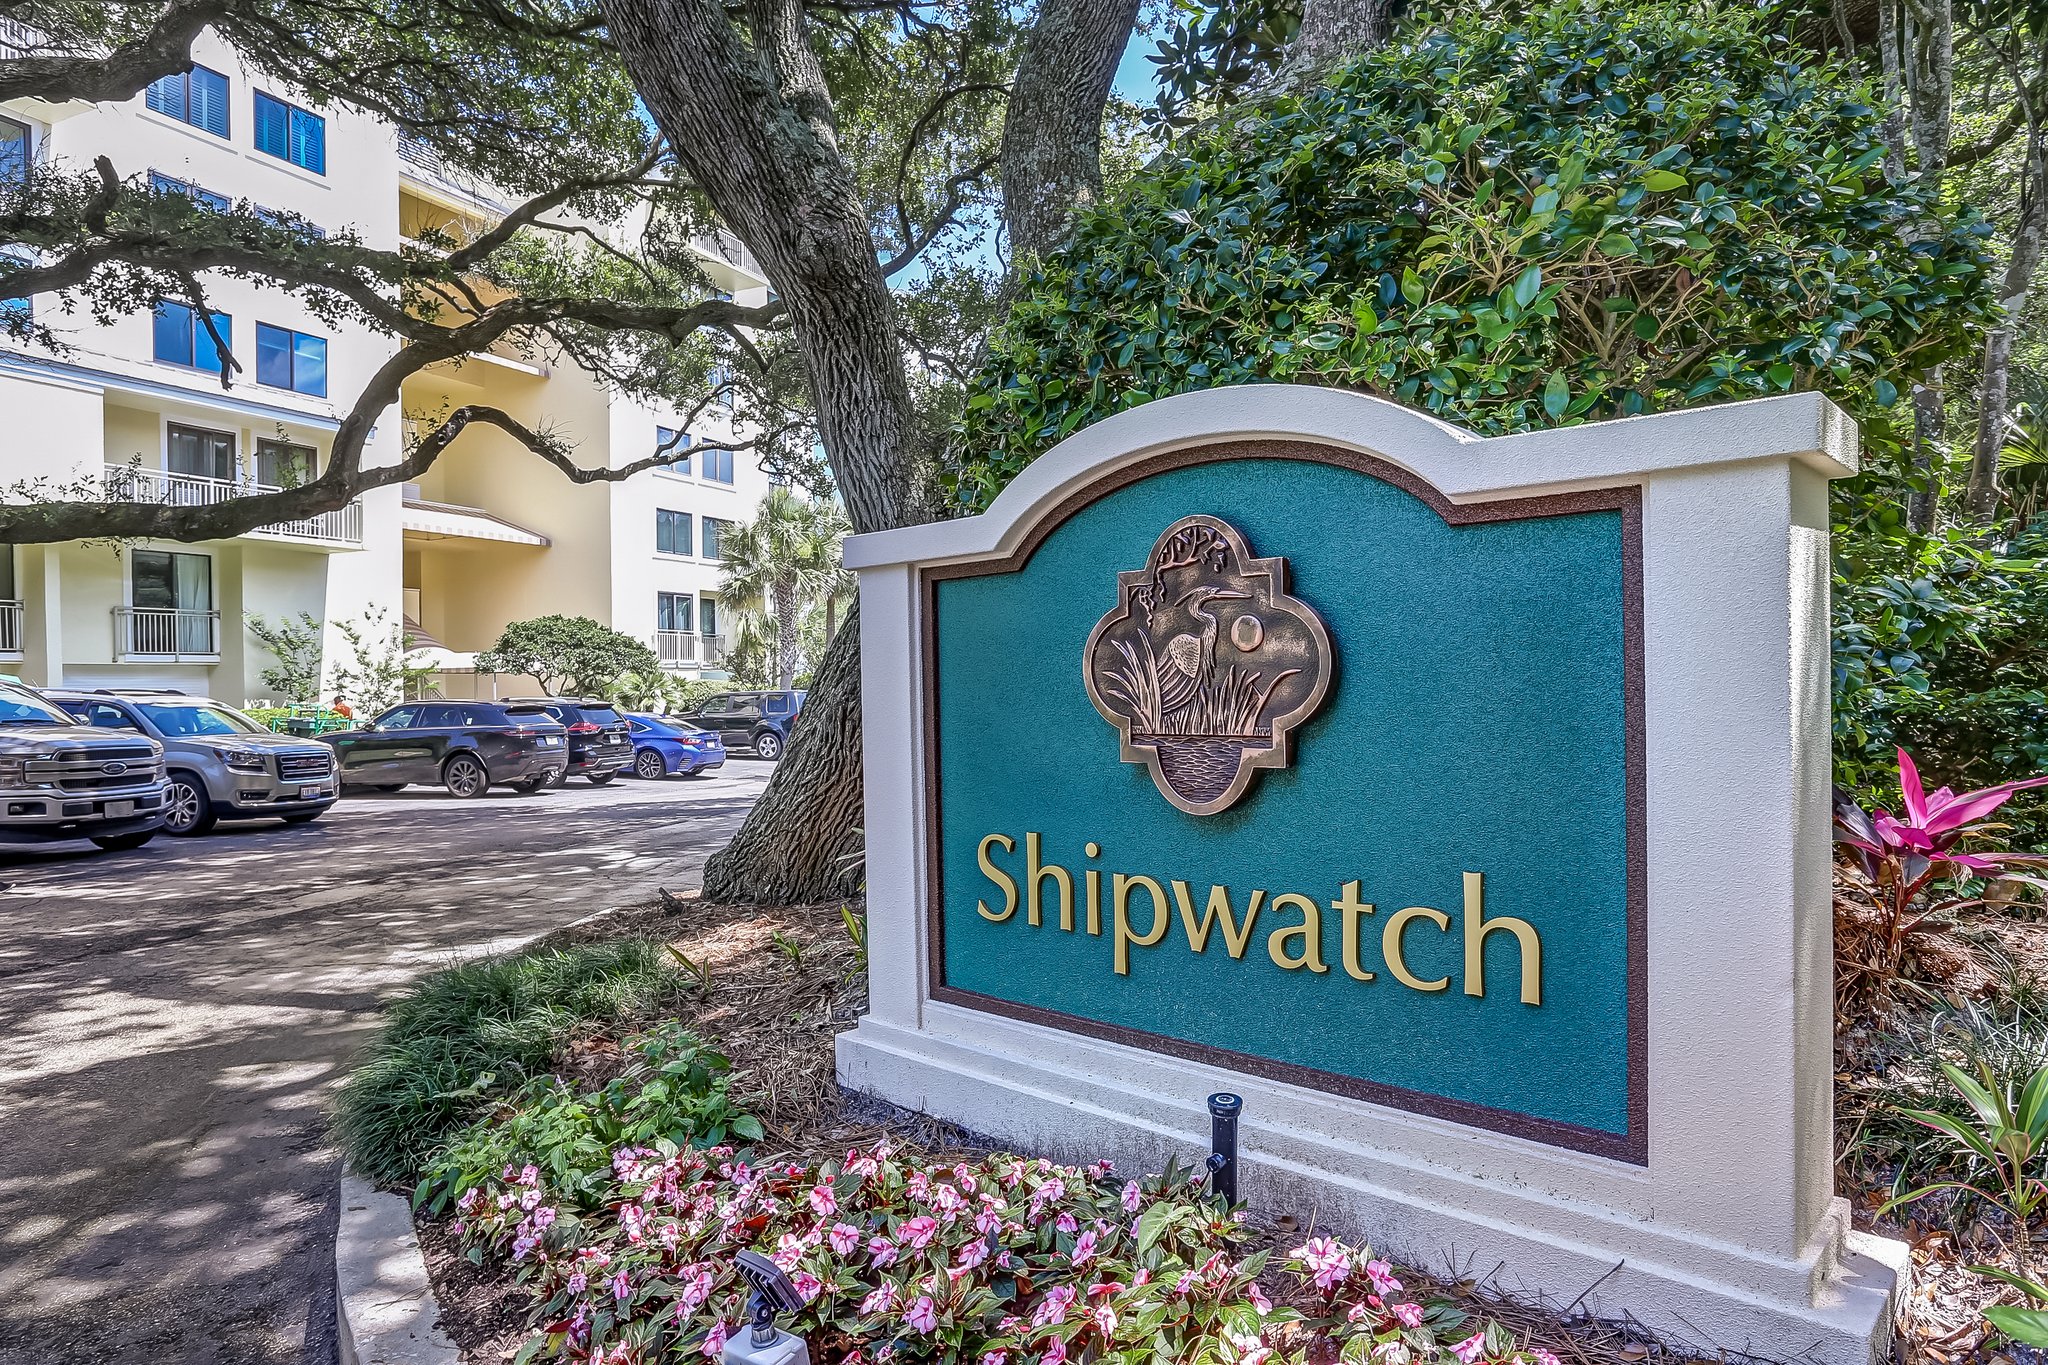 Welcome to Shipwatch